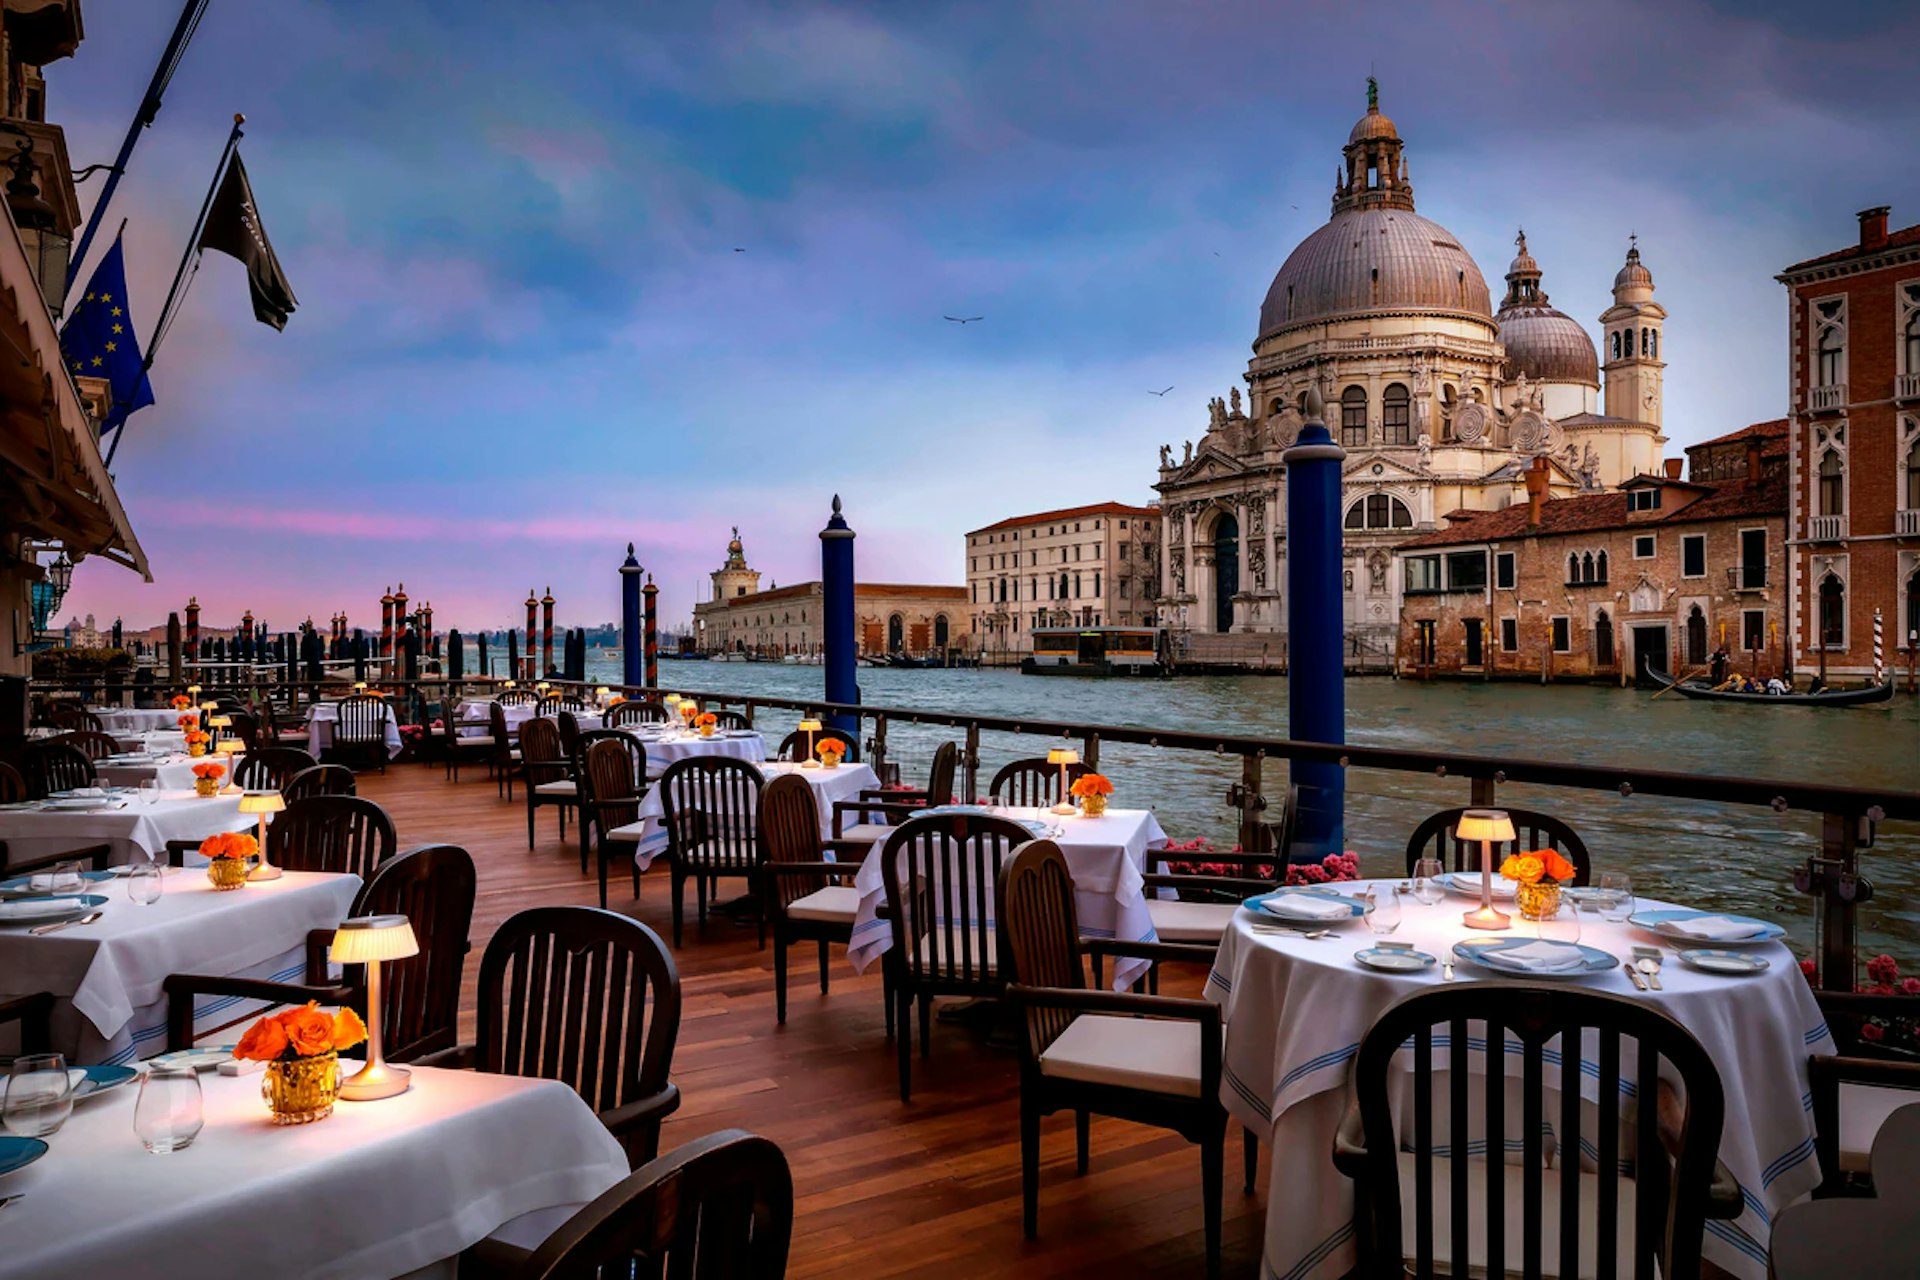 The view from the terrace of The Gritti Palace Venice